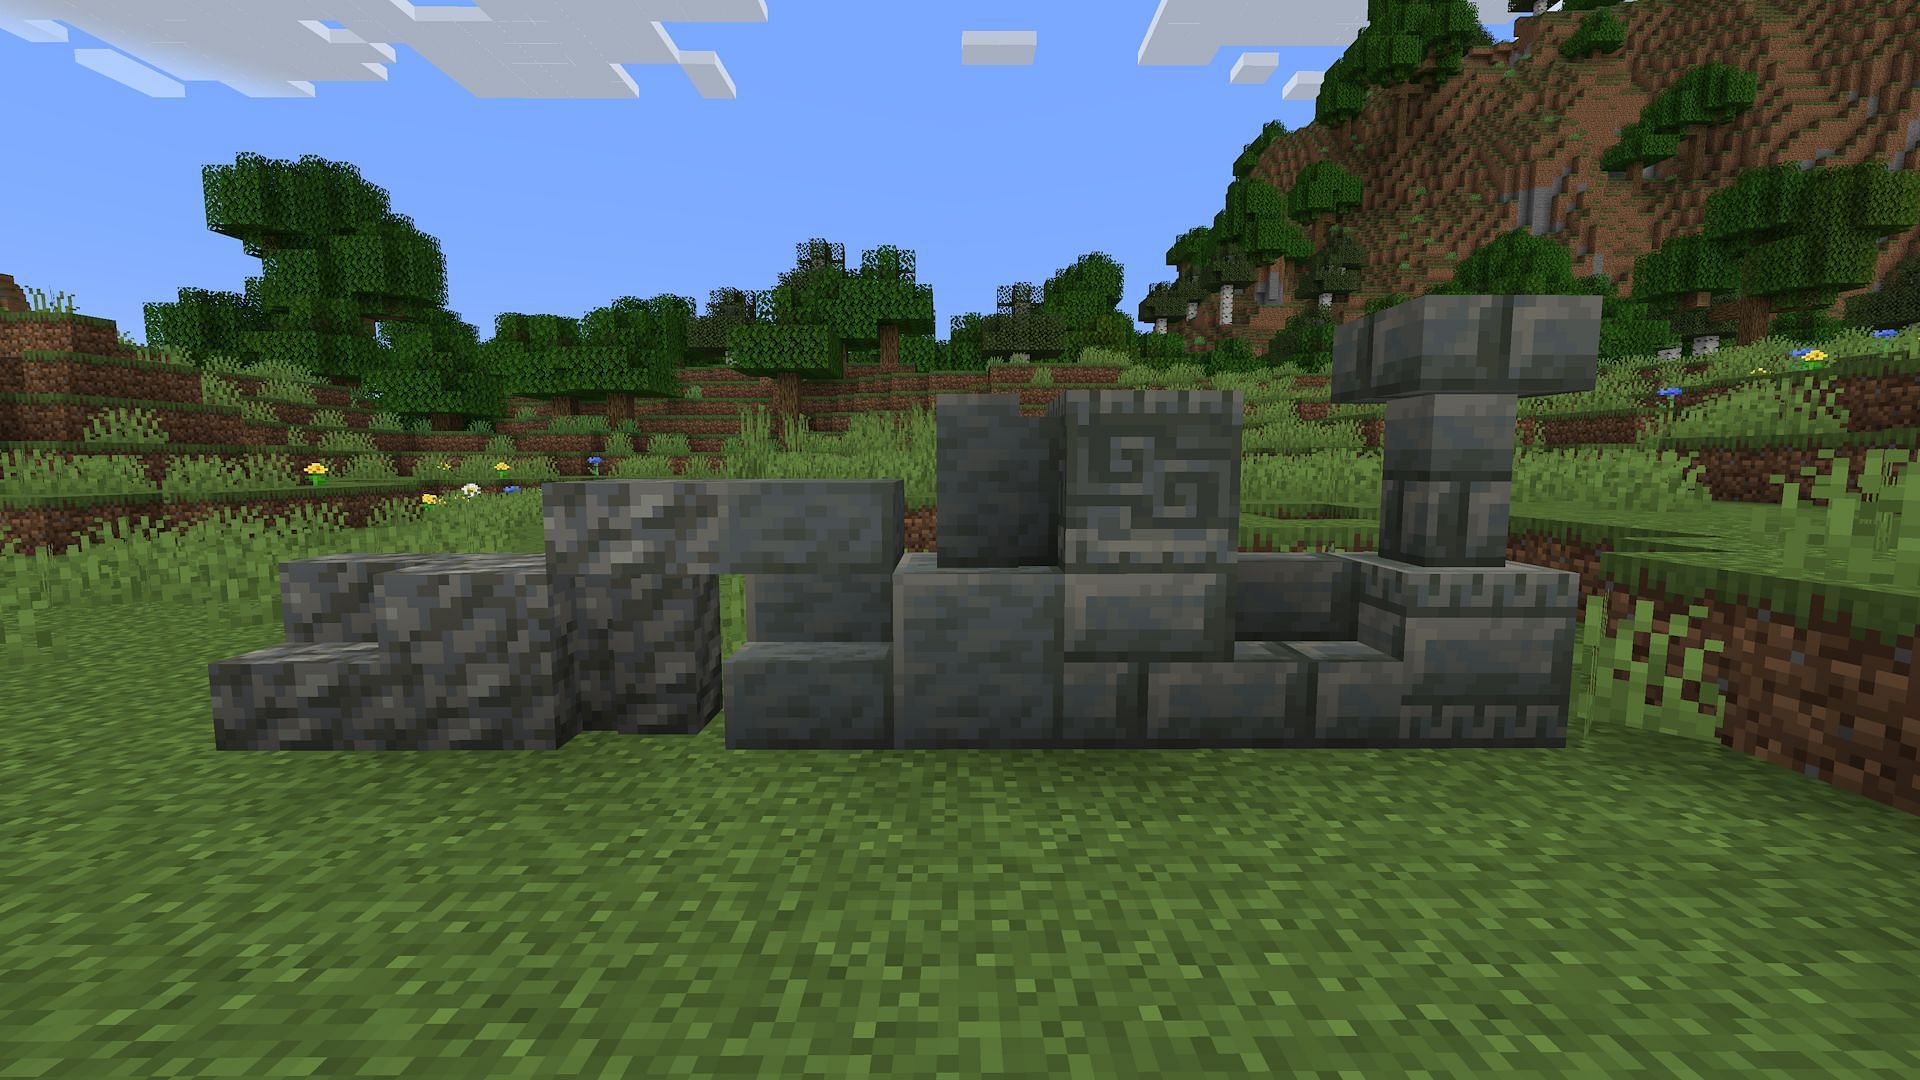 The stonecutter will now be useful for getting new tuff blocks (Image via Mojang)